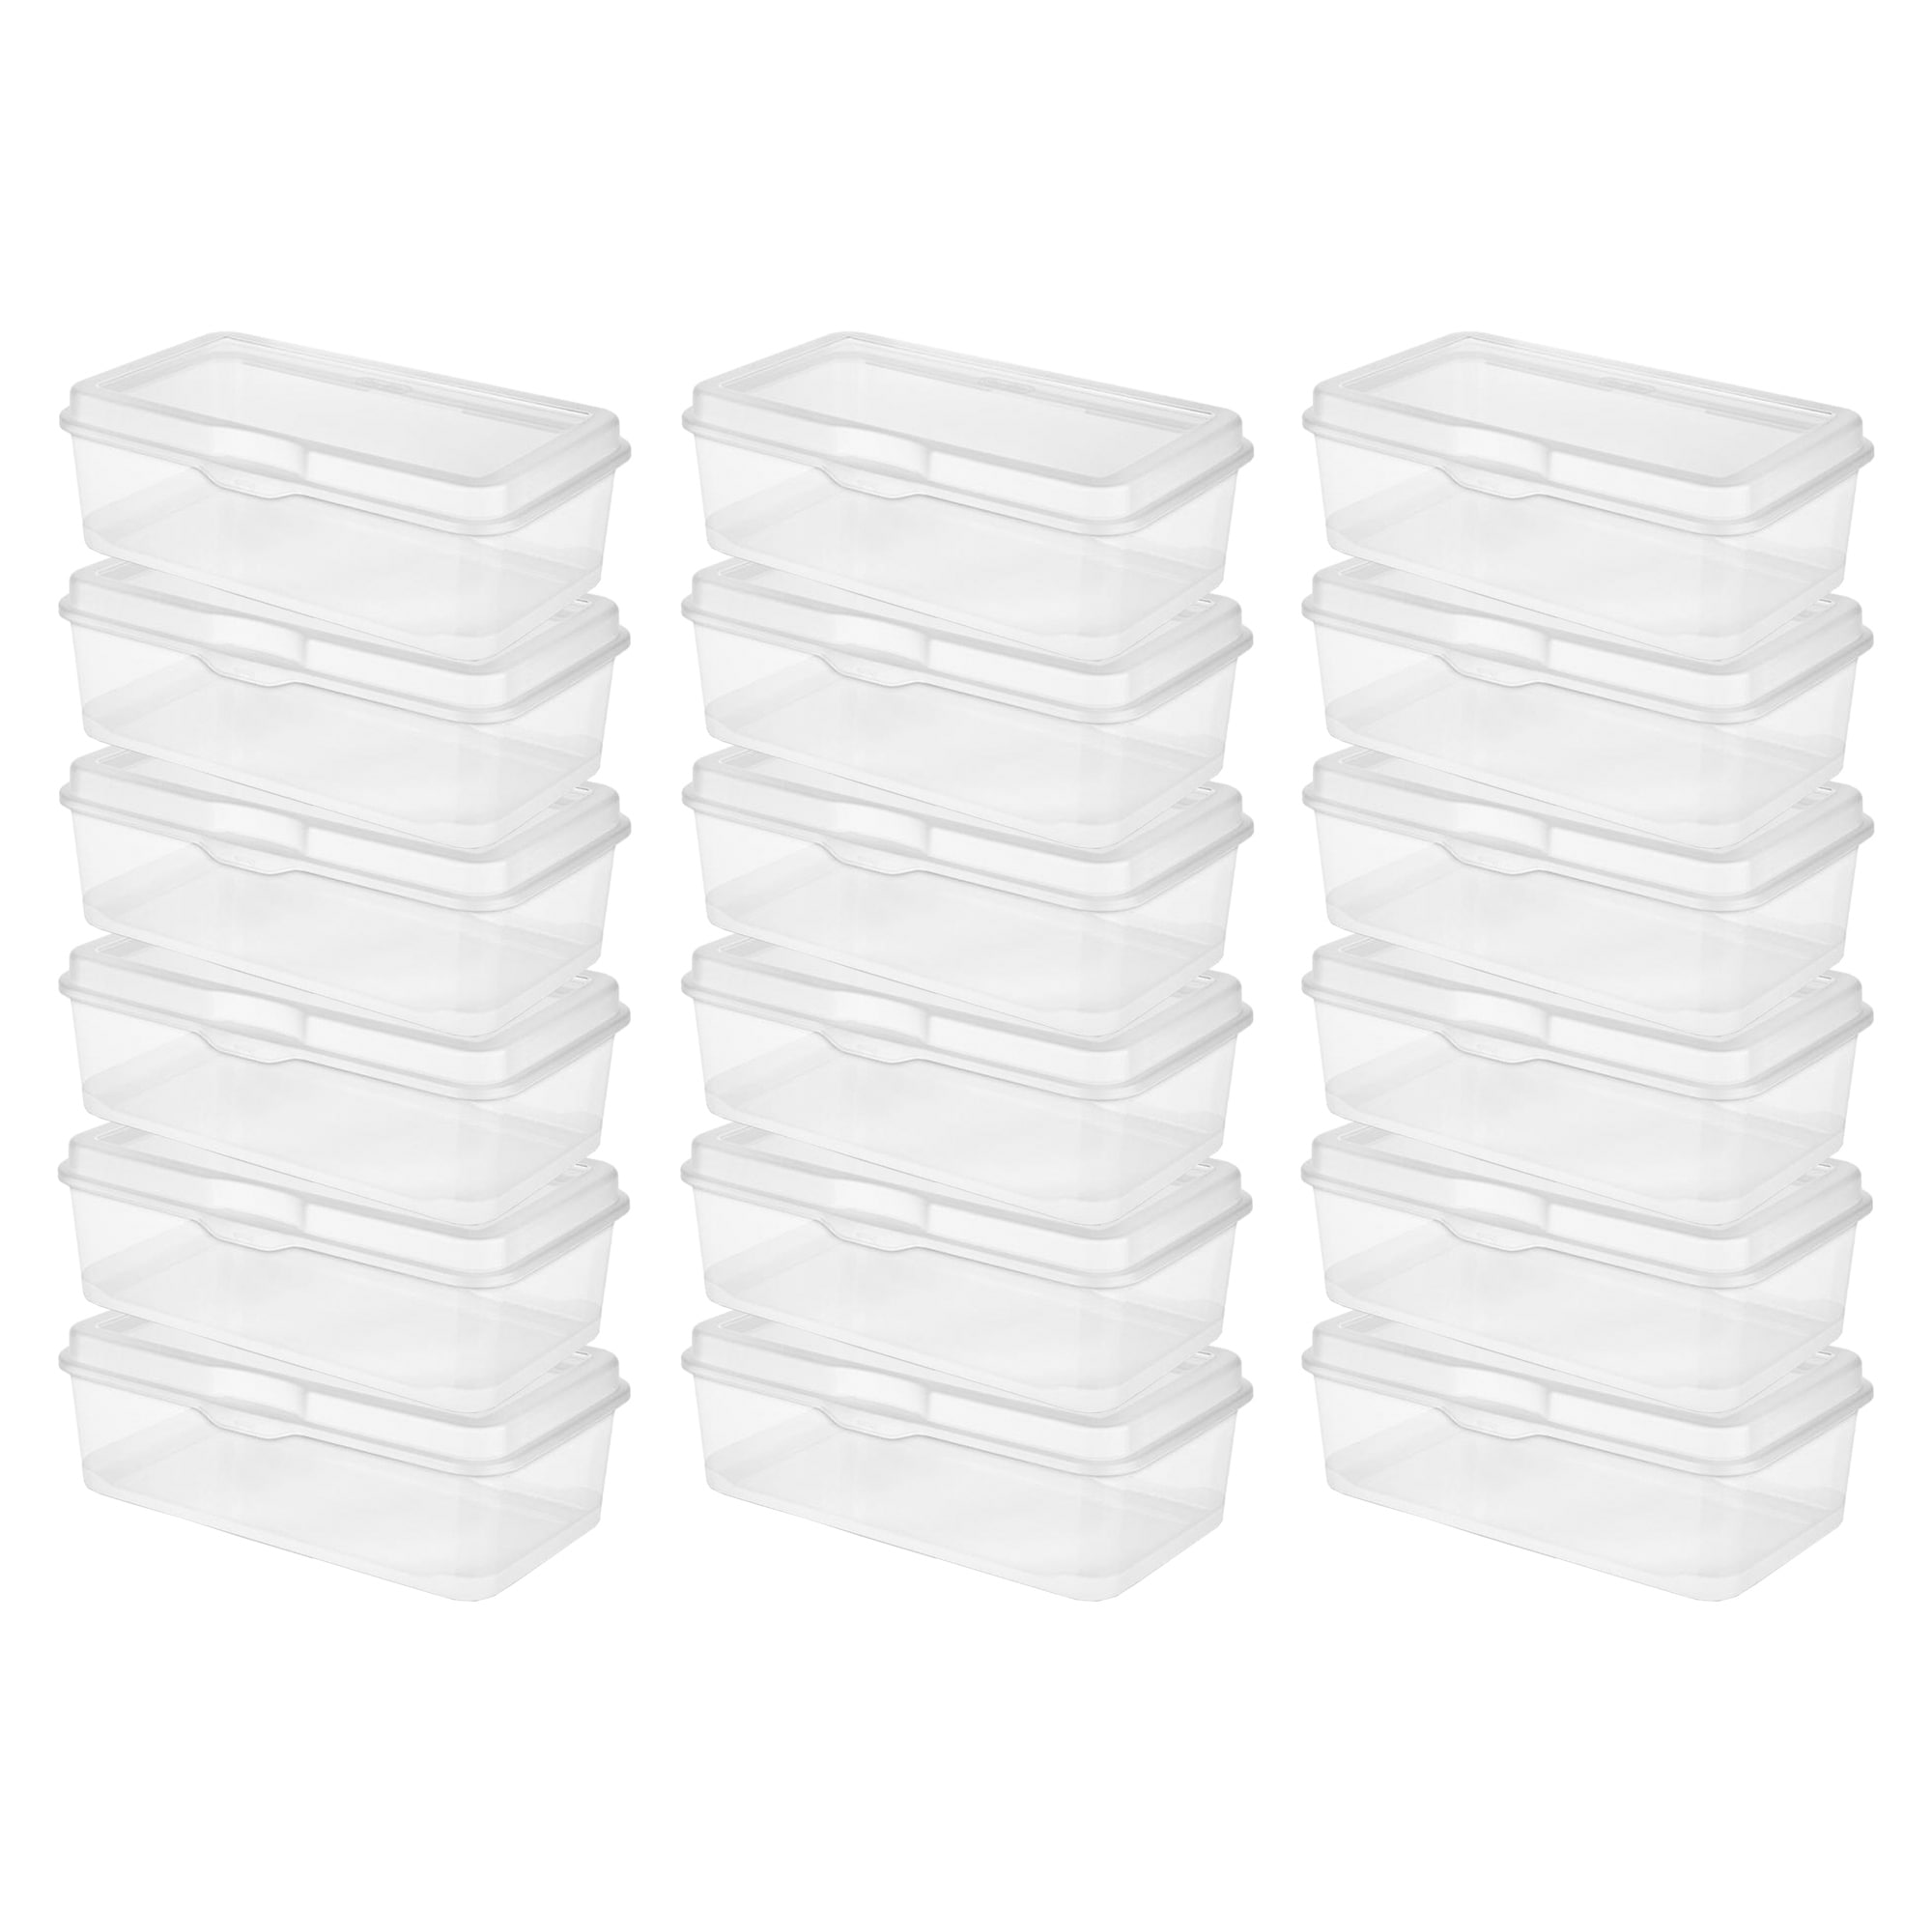 https://ak1.ostkcdn.com/images/products/is/images/direct/55622dcb52cc484acab19bdd68d2895e2adb82d4/Sterilite-Plastic-Stacking-FlipTop-Latching-Storage-Box-Container%2C-Clear-18-Pack.jpg